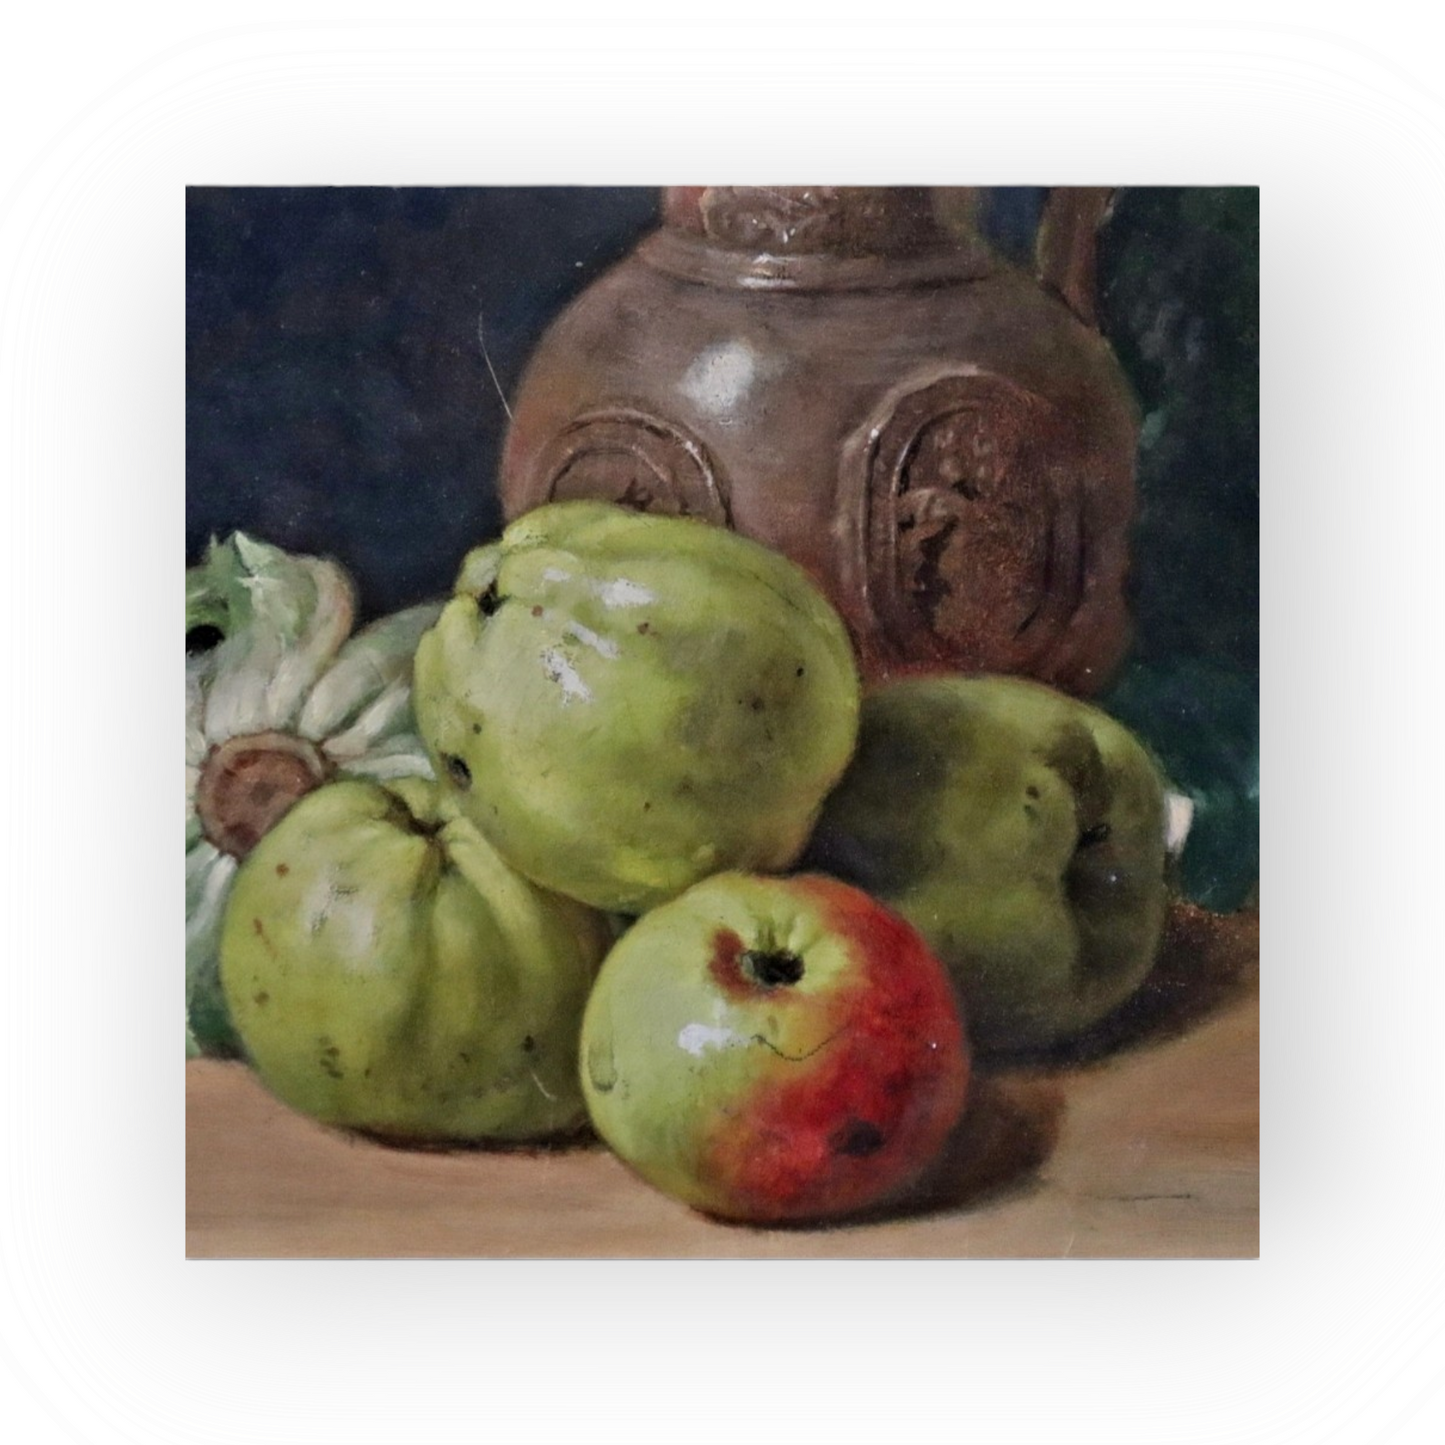 19th Century Flemish School Antique Still Life Oil Painting With Fruit, Vegetables, 16thC Raeren Stoneware Jug and Delftware Plate